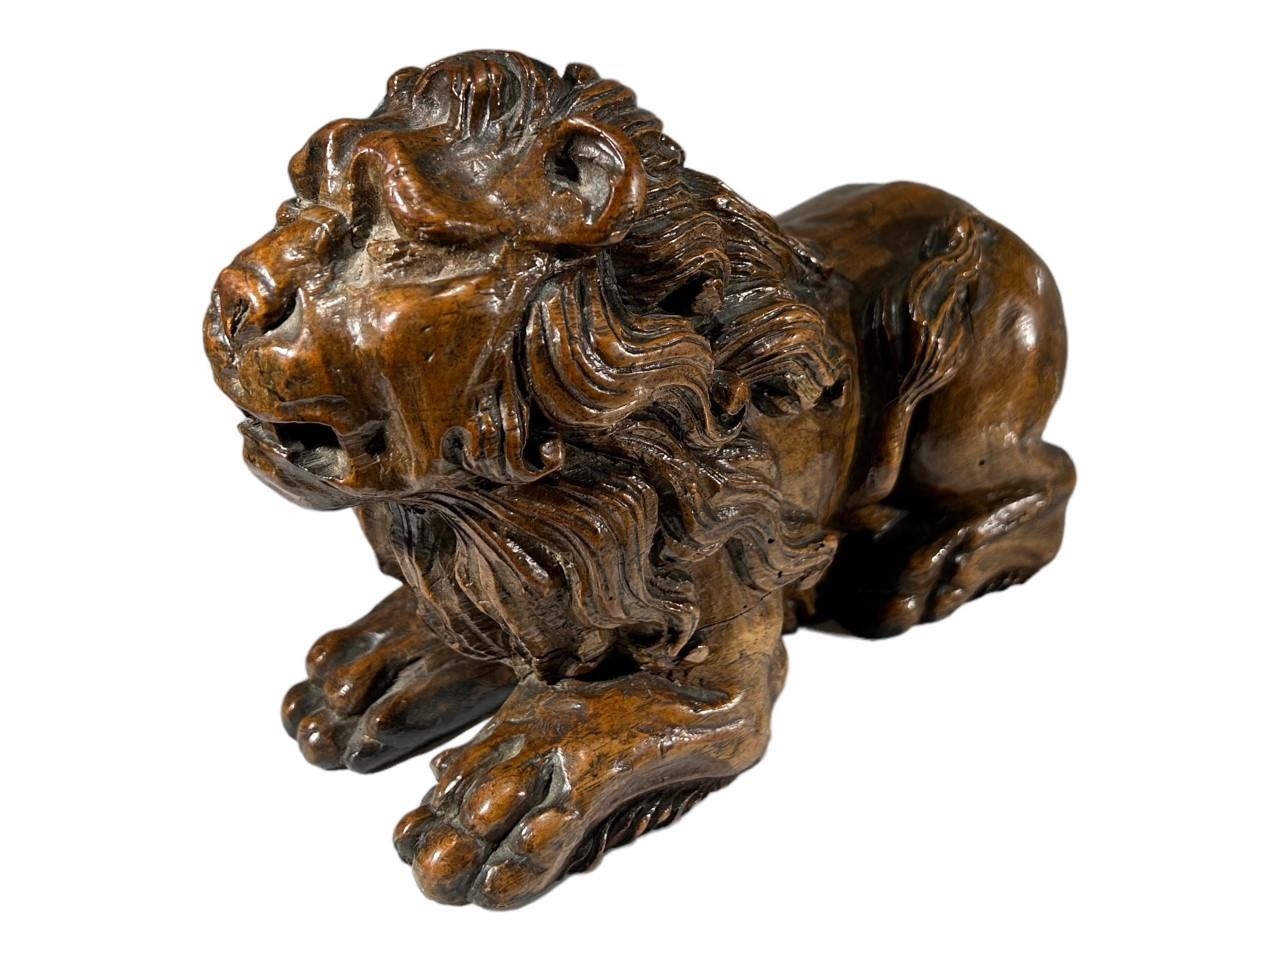 AN ITALIAN 18TH/19TH CENTURY (POSSIBLY WALNUT) CARVED WOOD FIGURE OF A LION. (h 12.5cm x w 20cm x - Image 5 of 7